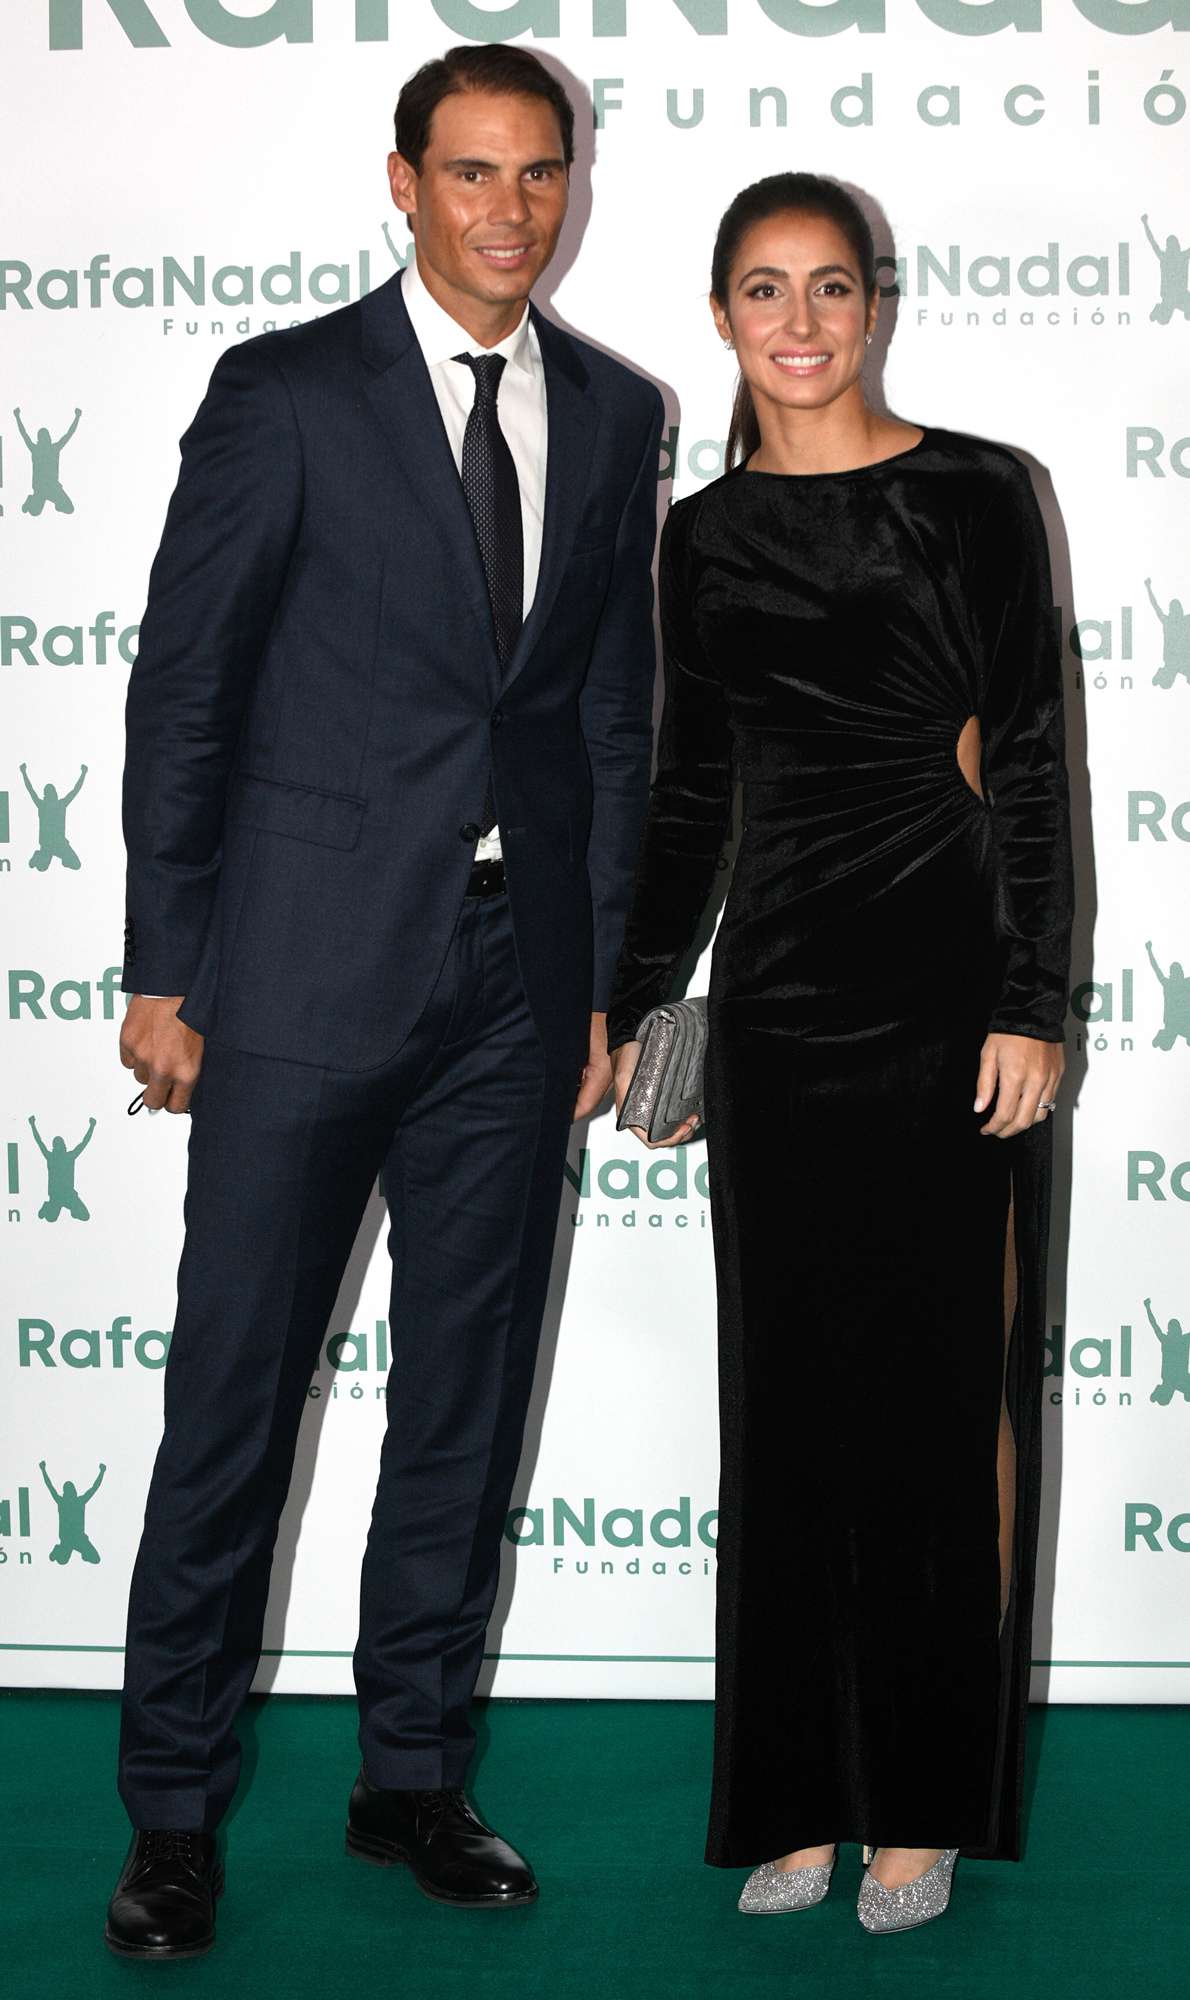 Rafael Nadal and Maria Francisca Perello attended the celebration of the 10th anniversary of the Rafa Nadal Foundation held at the Italian Consulate on November 18, 2021 in Madrid, Spain